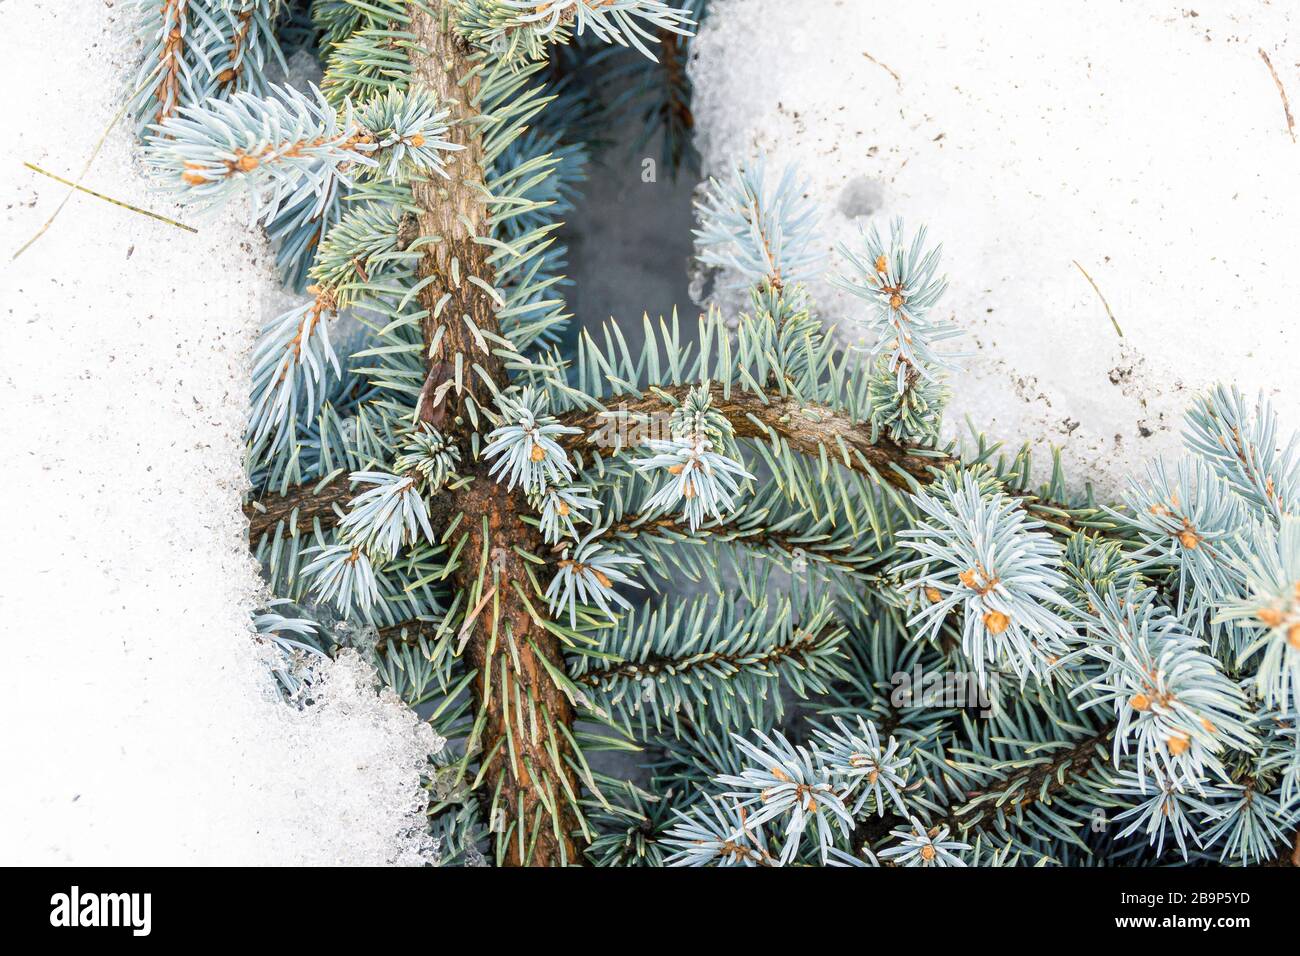 blue spruce with young shoots in spring snow Stock Photo